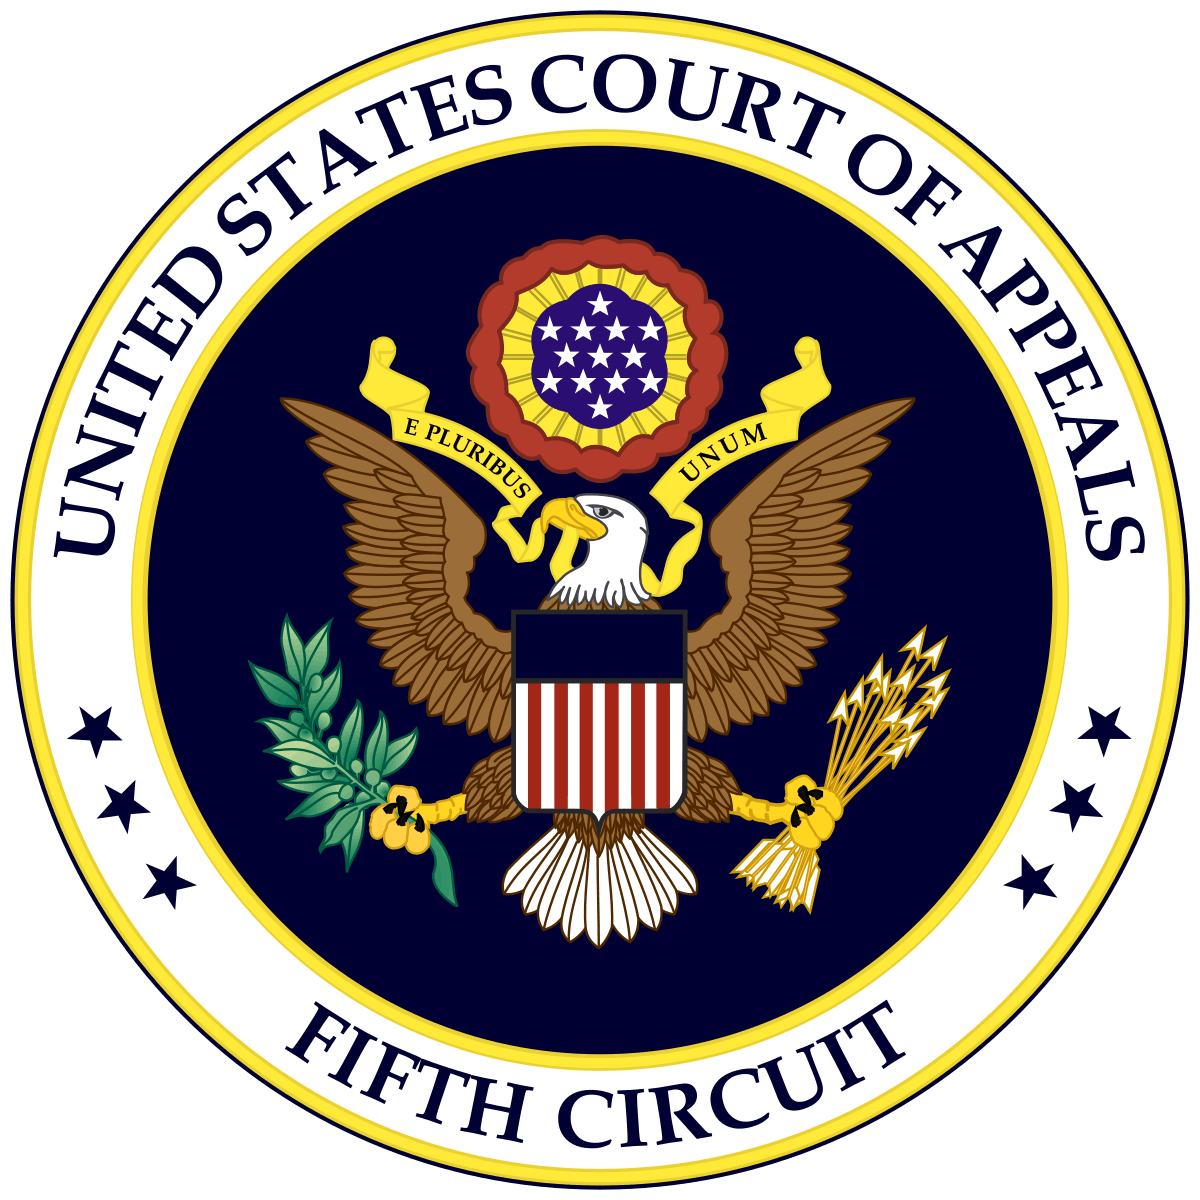 The seal of the United States Court of Appeals showcases the prestige and authority of this judicial body.